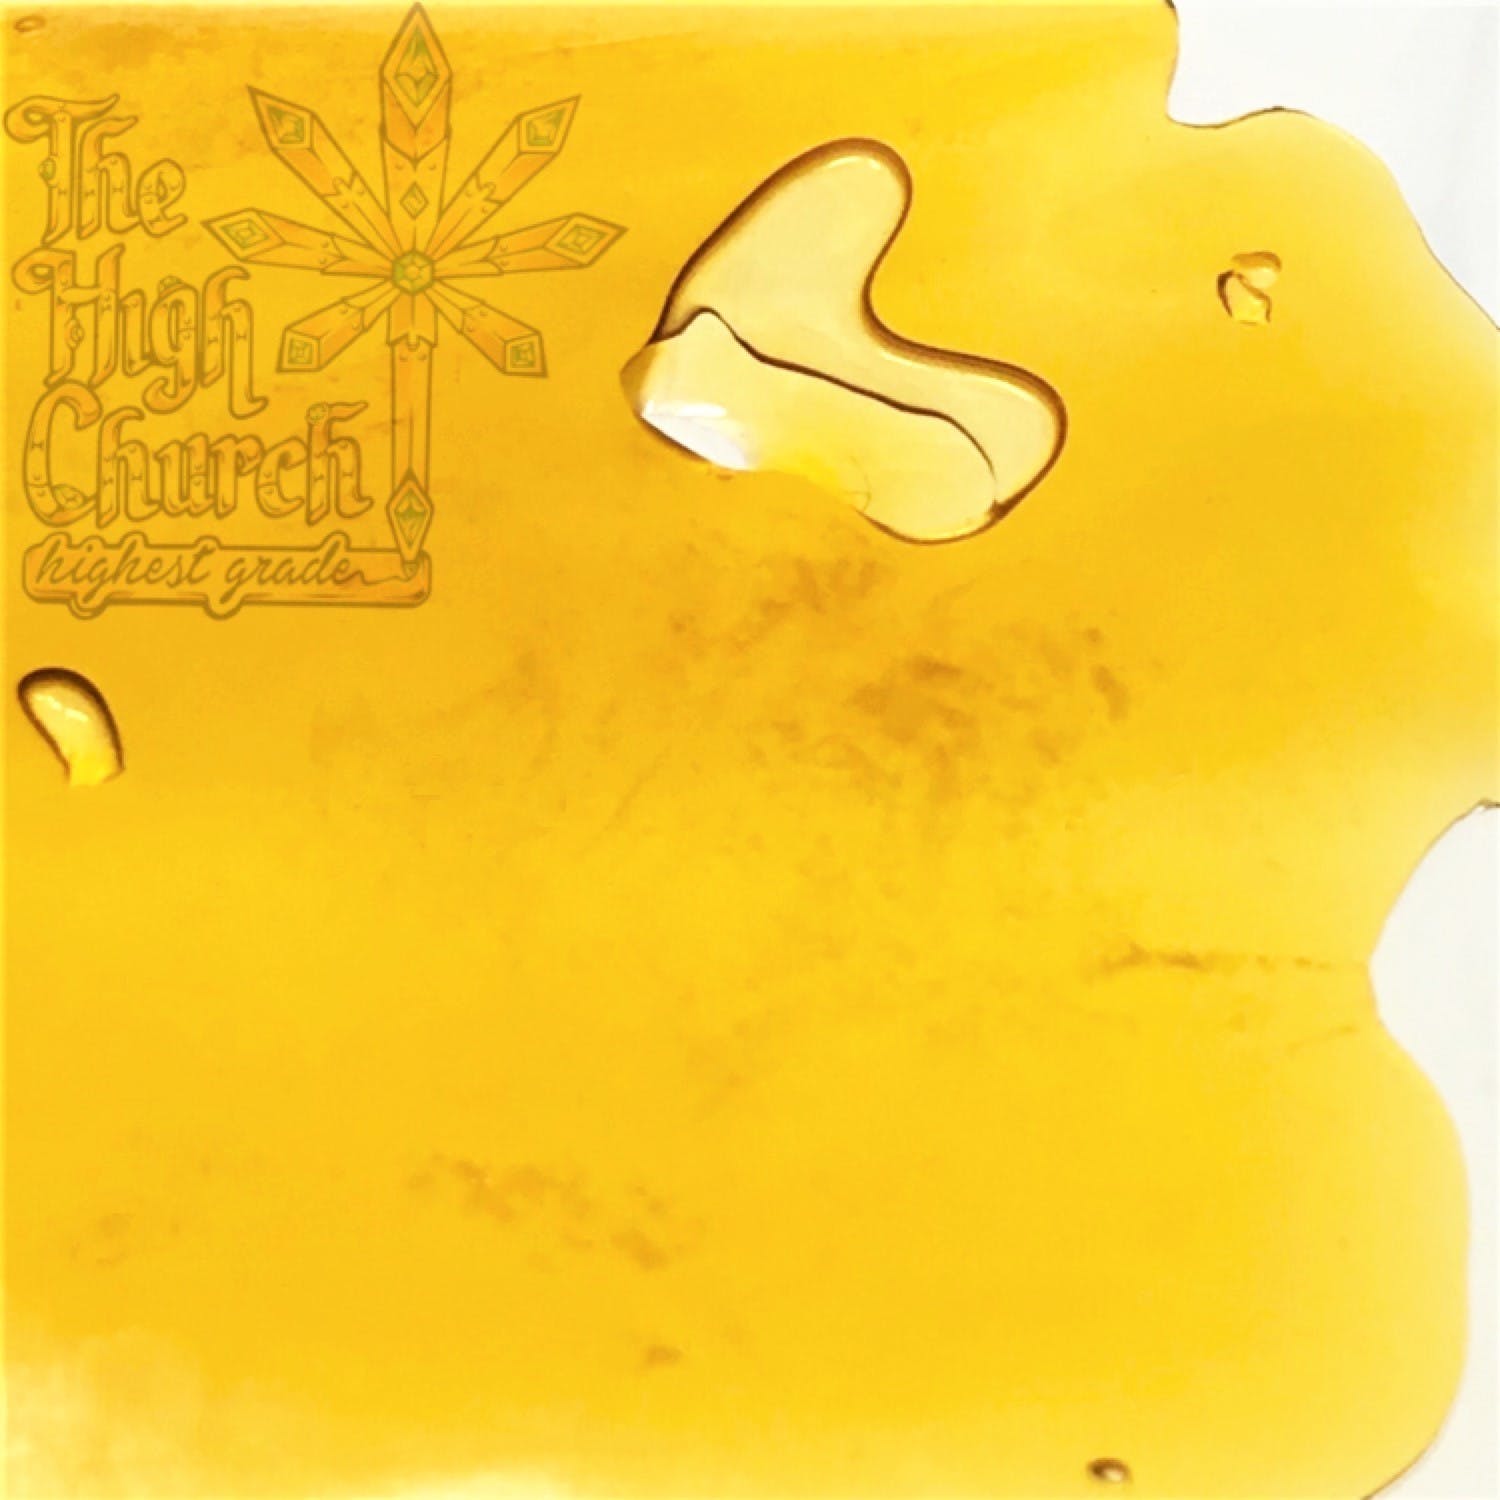 concentrate-shaman-extracts-platinum-og-dewaxed-shatter